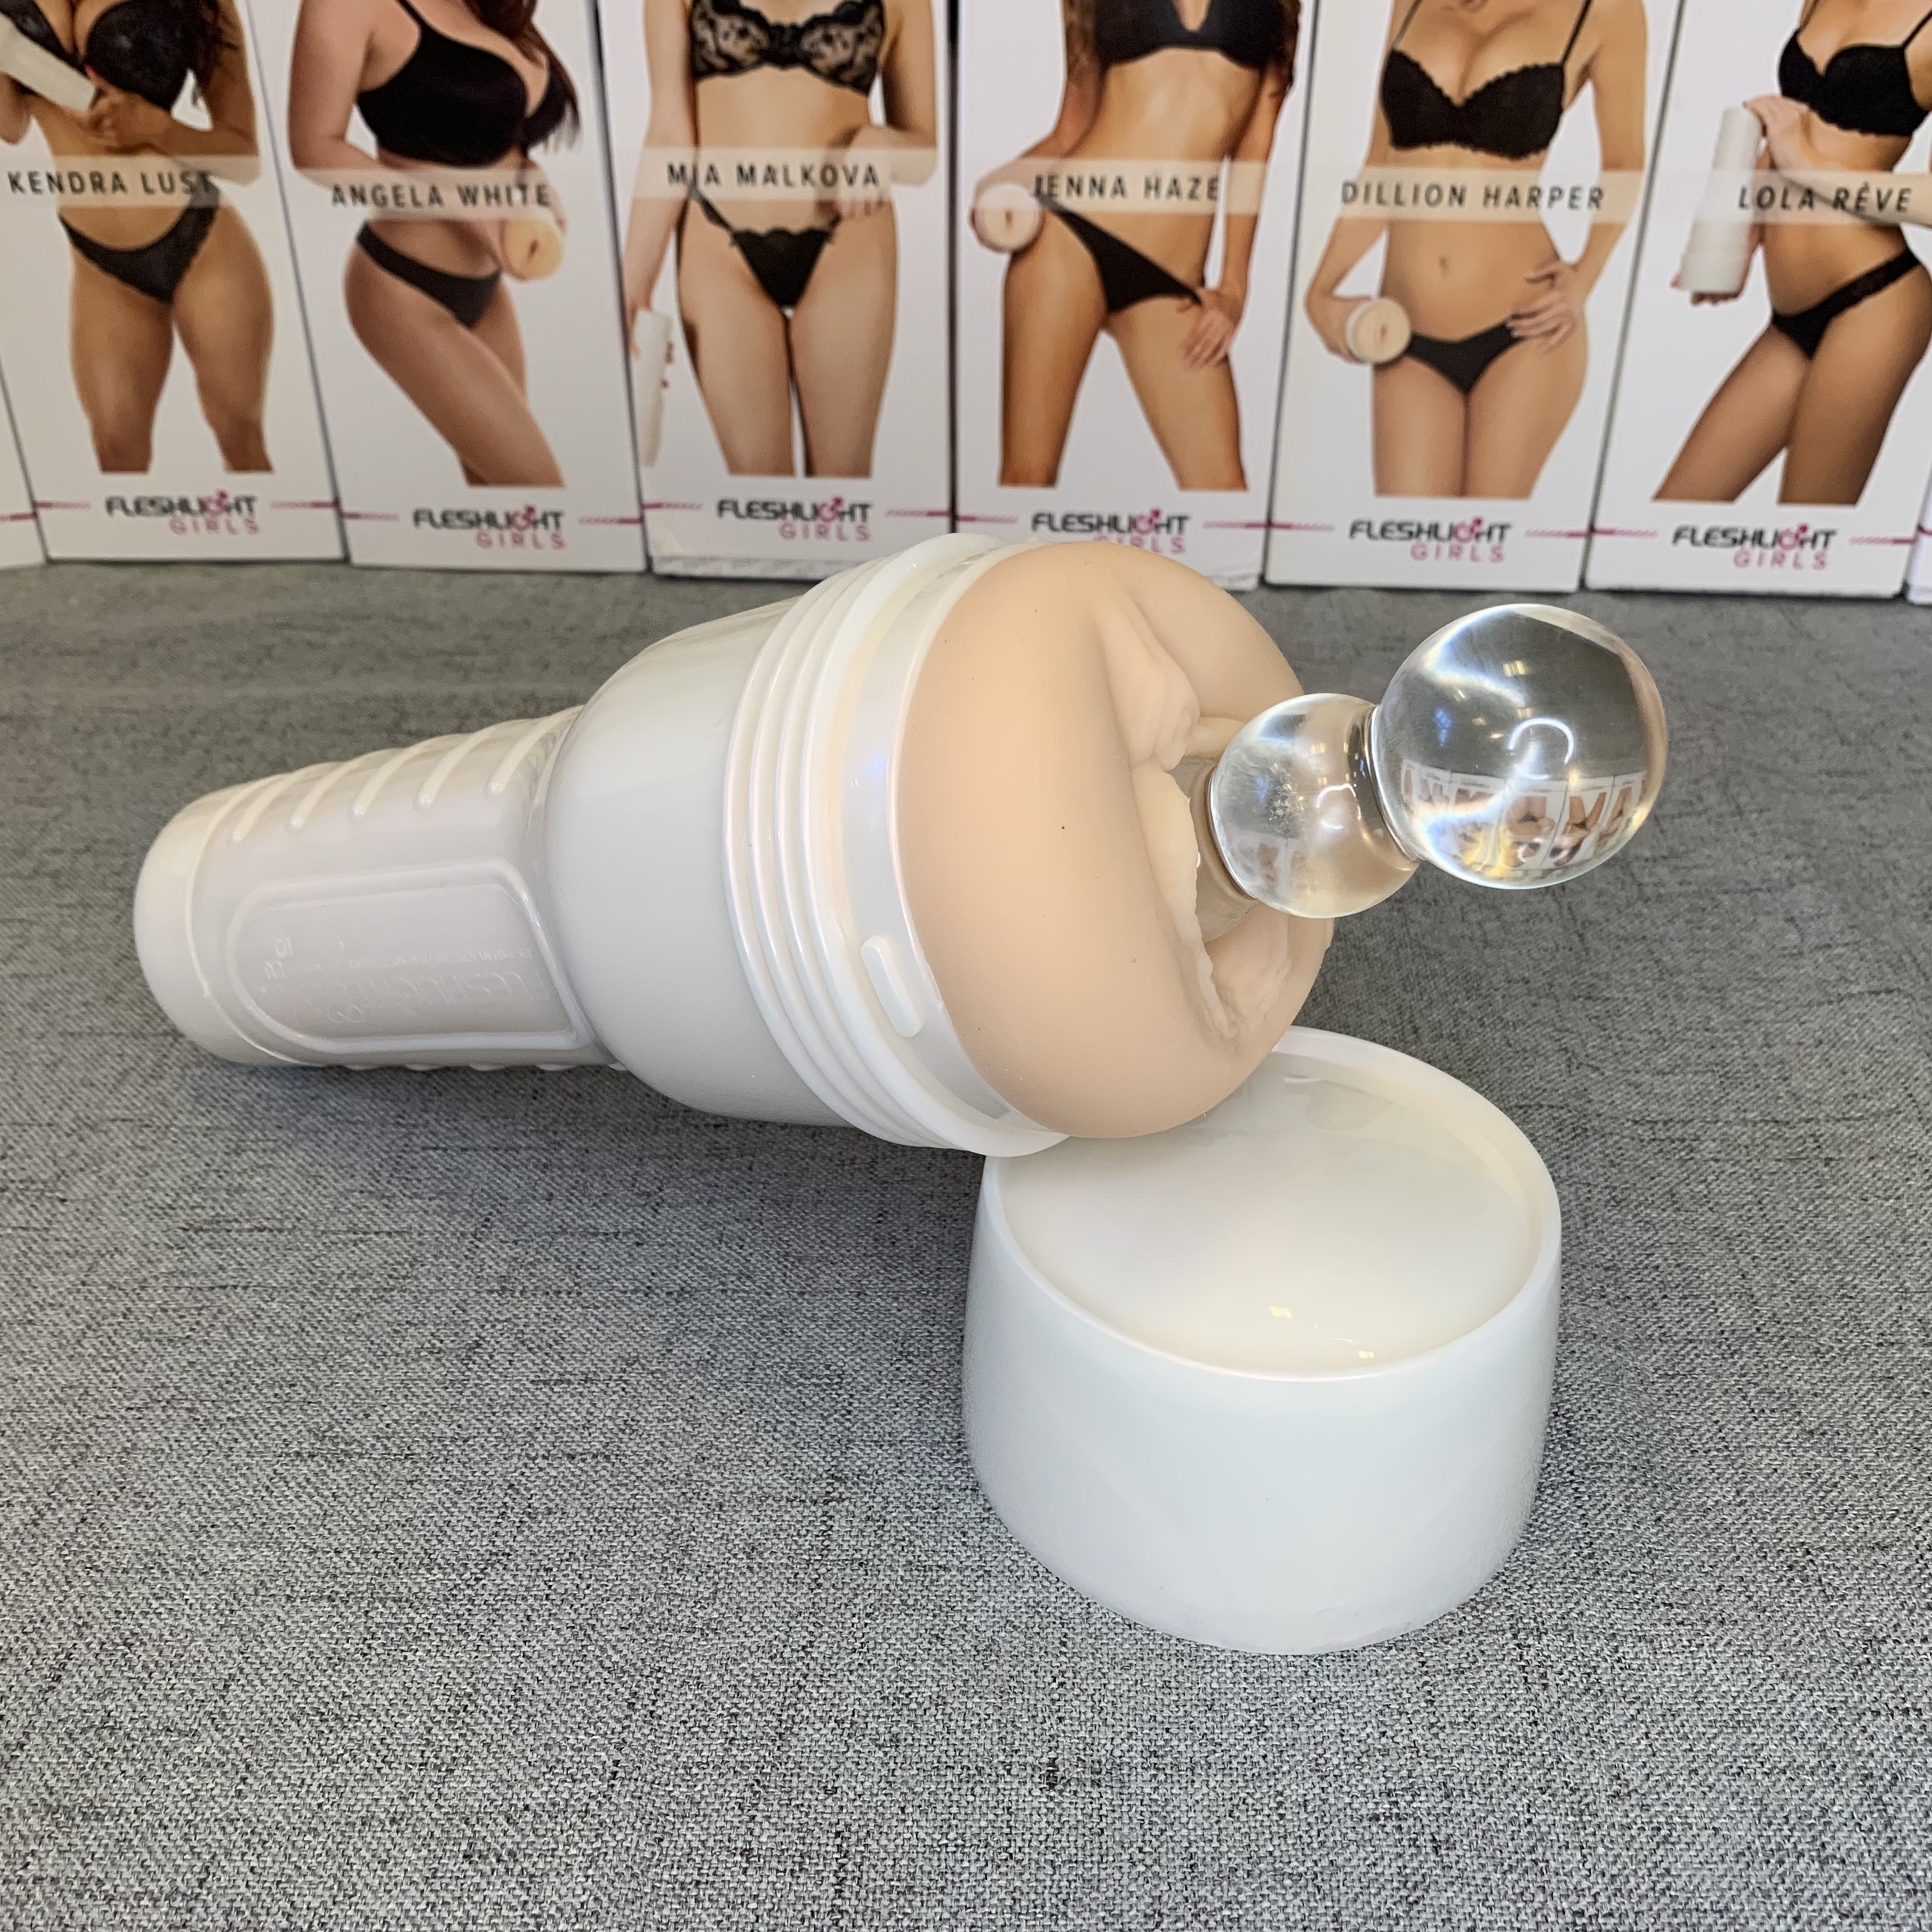 Emily Willis Fleshlight Squirt The Ease of use of the Emily Willis Fleshlight Squirt